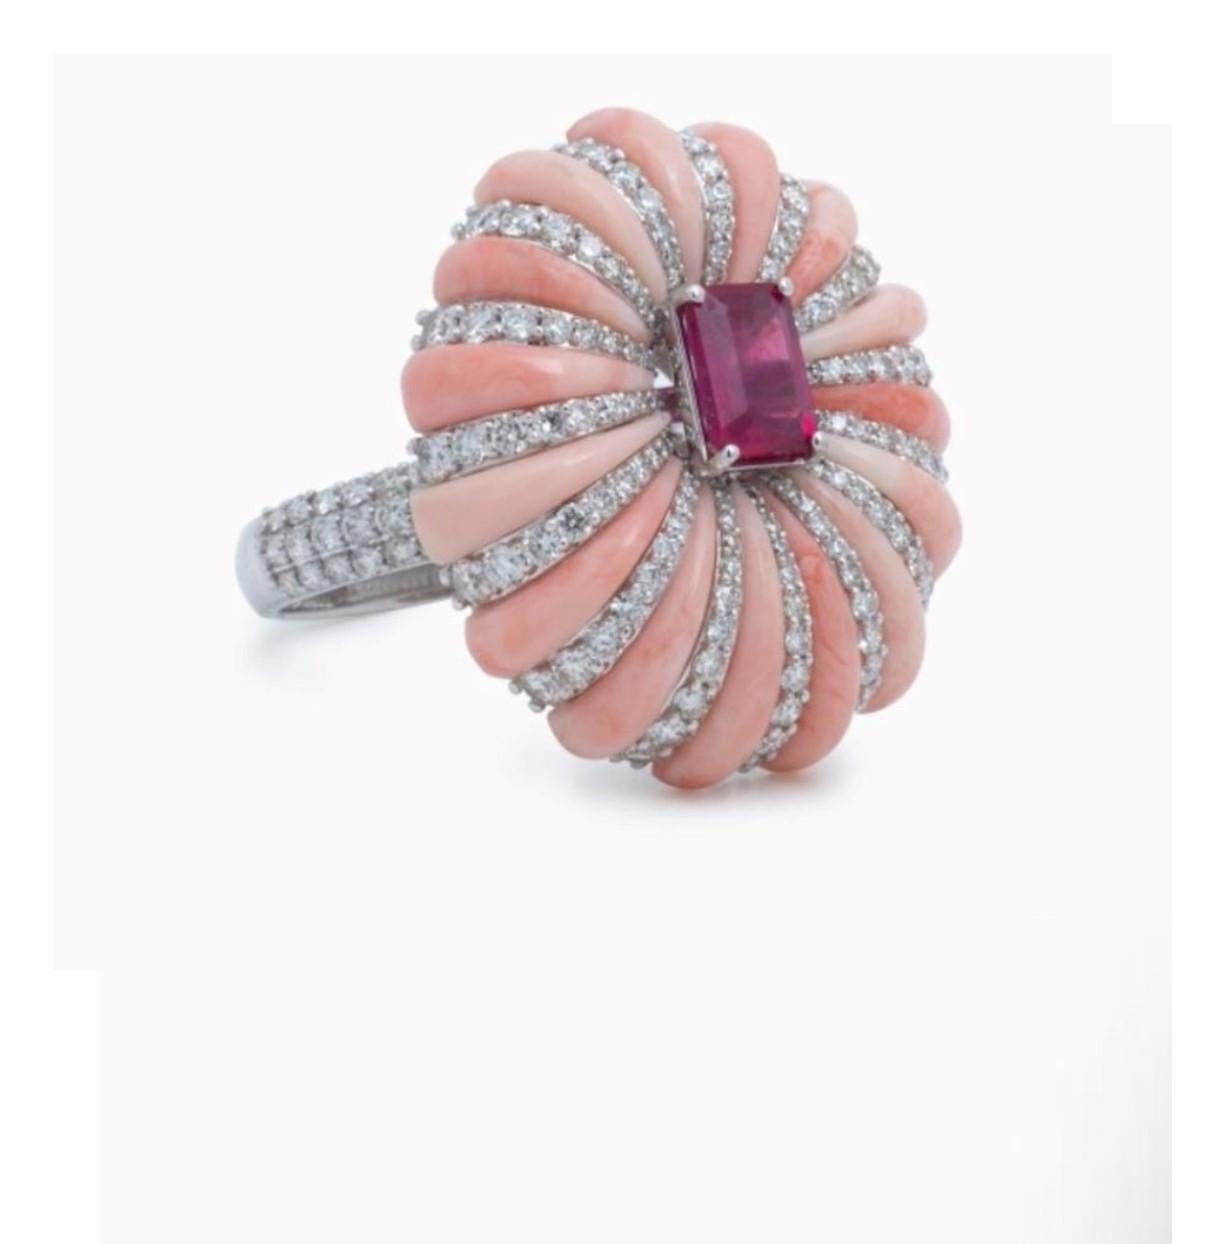 Mixed Cut NWT $15, 000 Fancy Large White Gold Glittering Coral Ruby Diamond Cocktail Ring For Sale